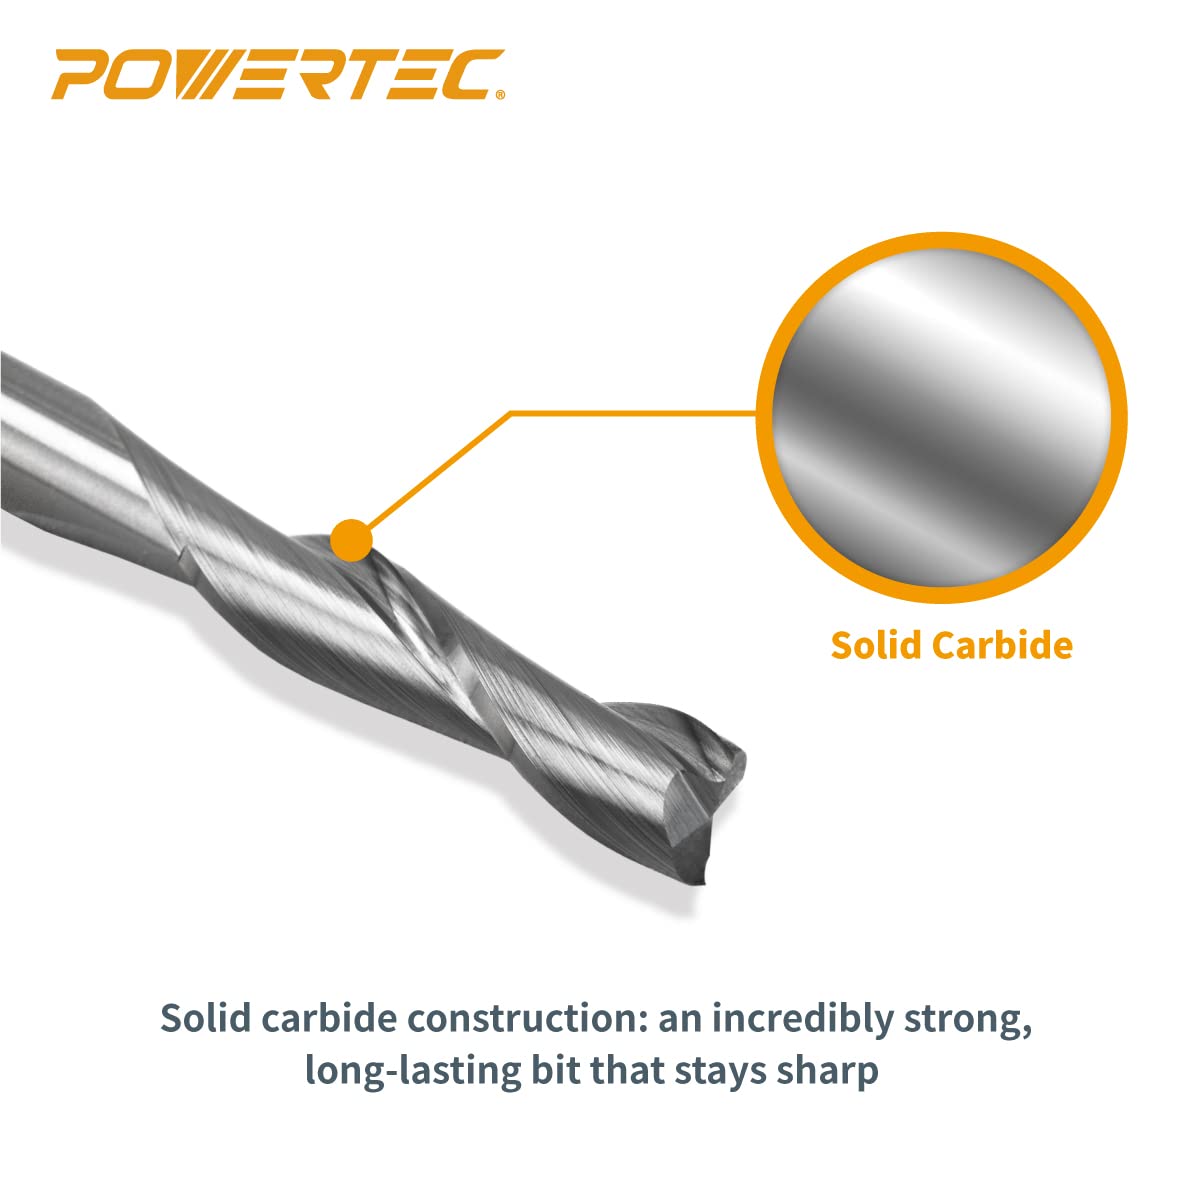 POWERTEC Solid Carbide Up Cut Spiral Router Bit, 1/4" Shank and 1/4 inch Cutting Dia., 1-Inch Cutting Length, Woodworking Router bits for use on CNC and Router Tool (73002)